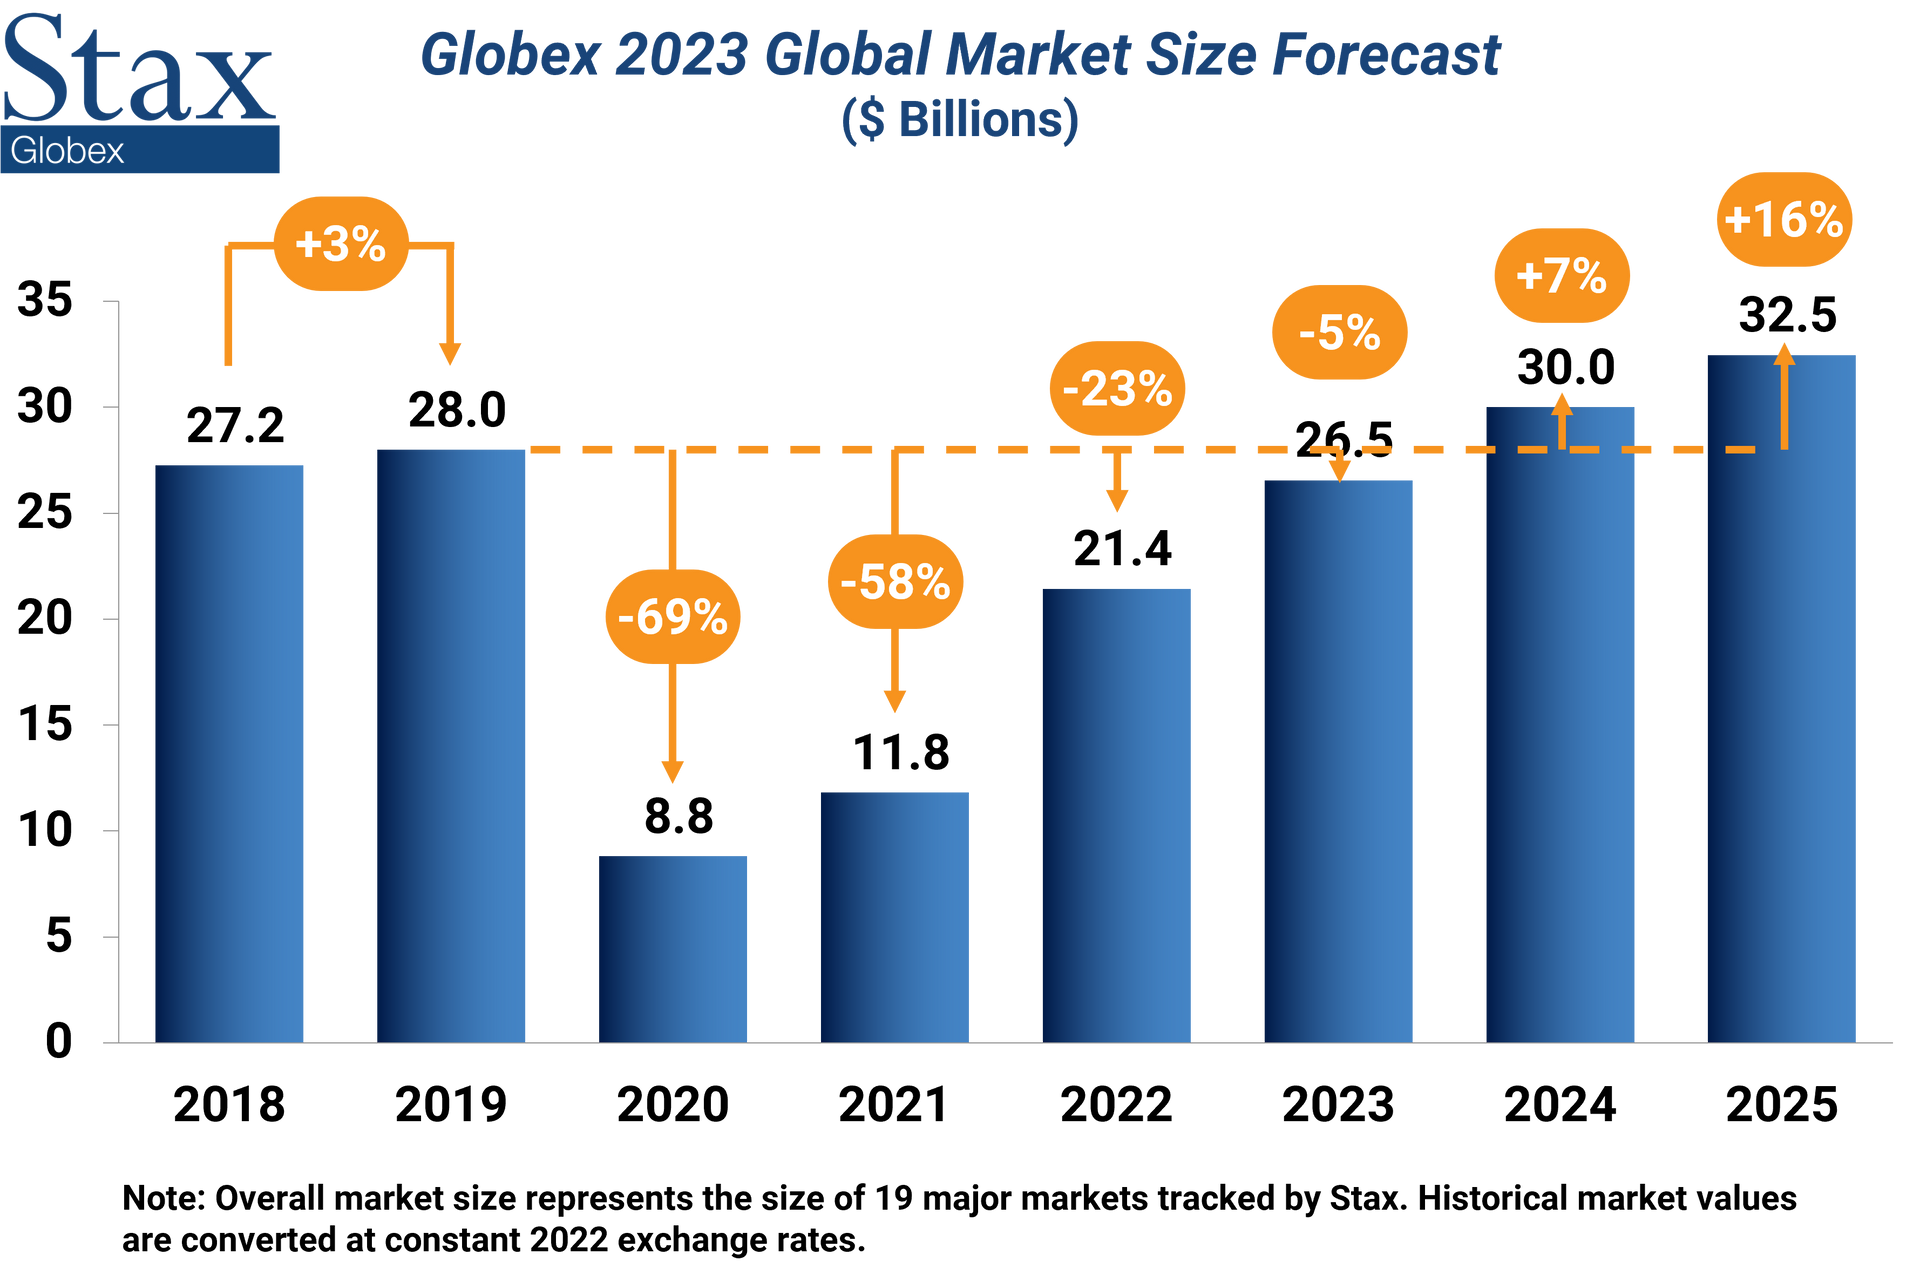 Bar chart depicting Globel 2023 Global Market Size Forecast (in billions). We project by 2025, the global market size will increase by 16% compared to pre-pandemic sizes (2018-2019).